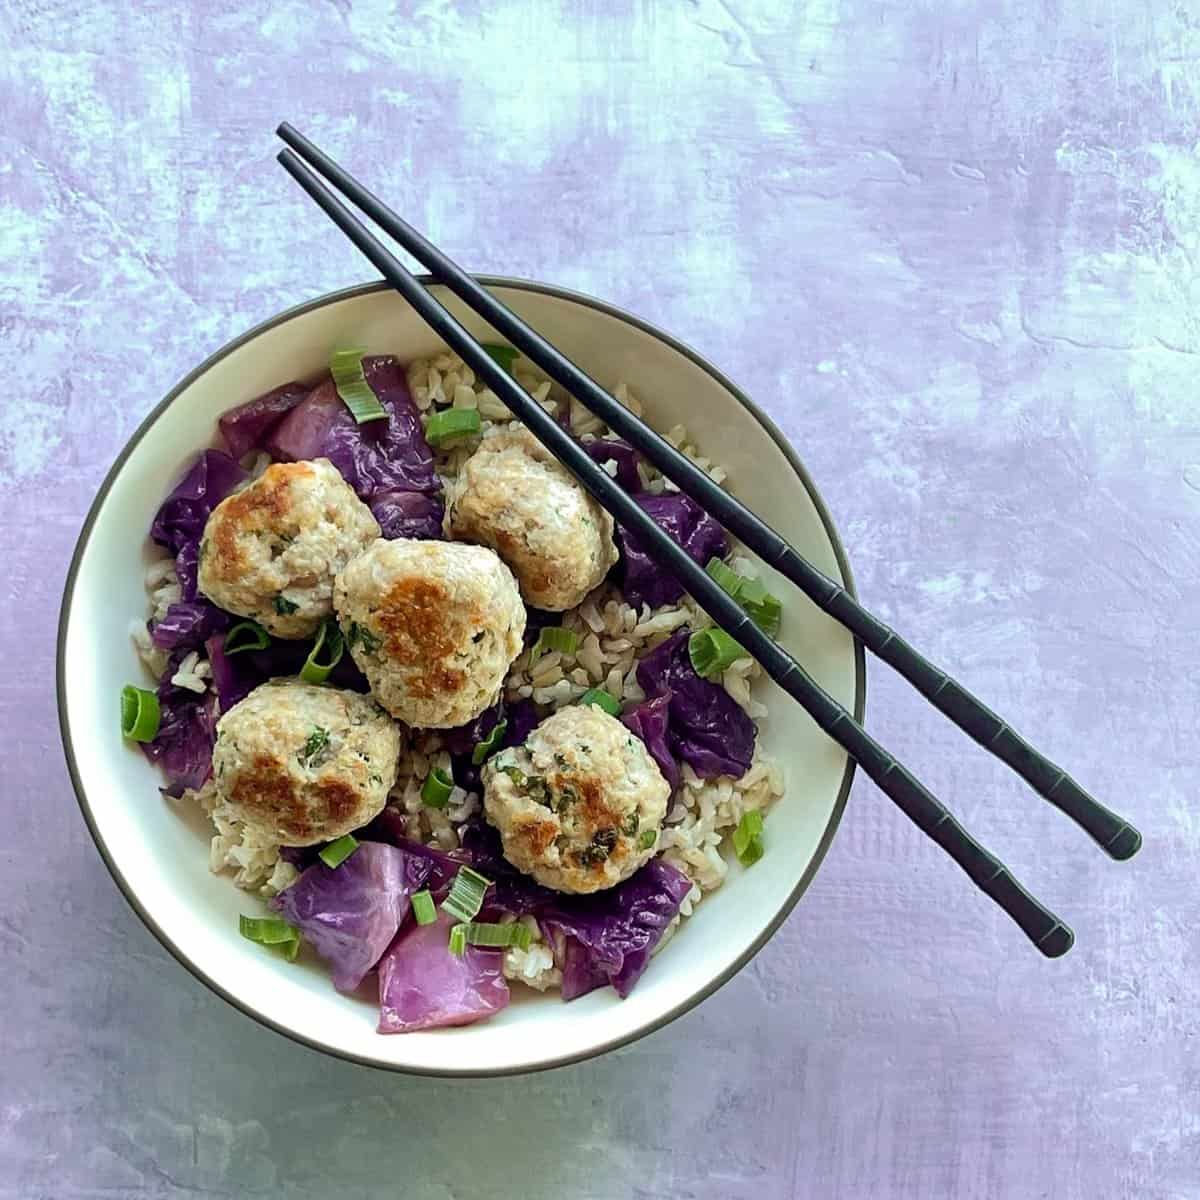 five shrimp and pork meatballs in a rice bowl with purple cabbage. There is a pair of chopsticks resting on the bowl.